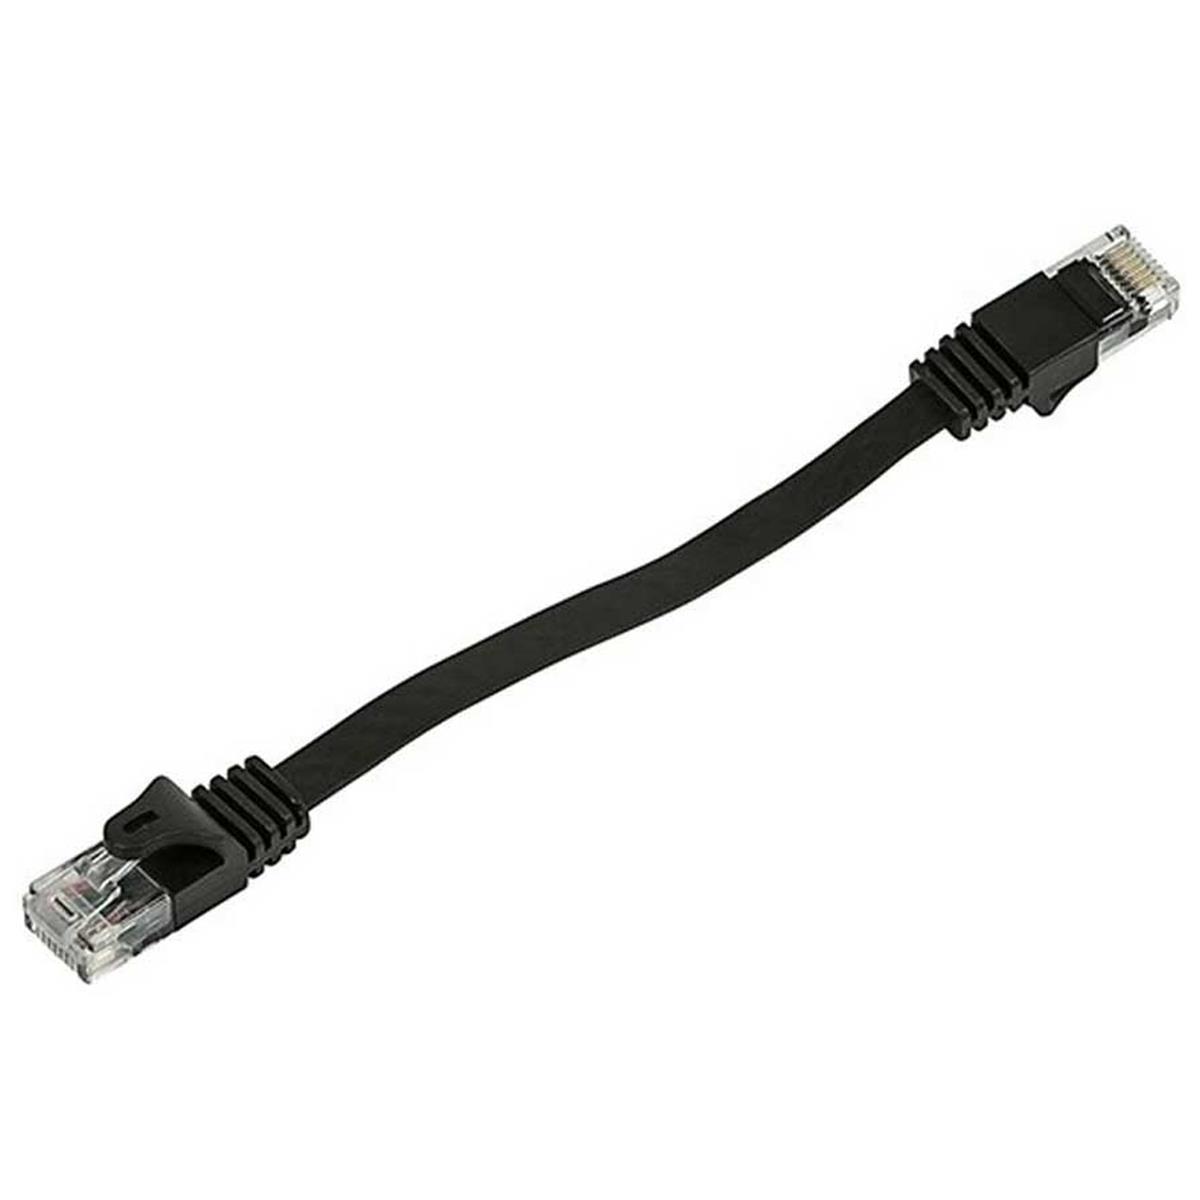 Image of Quasar Science 0.5' Cat-5 Cable with RJ45 Connectors